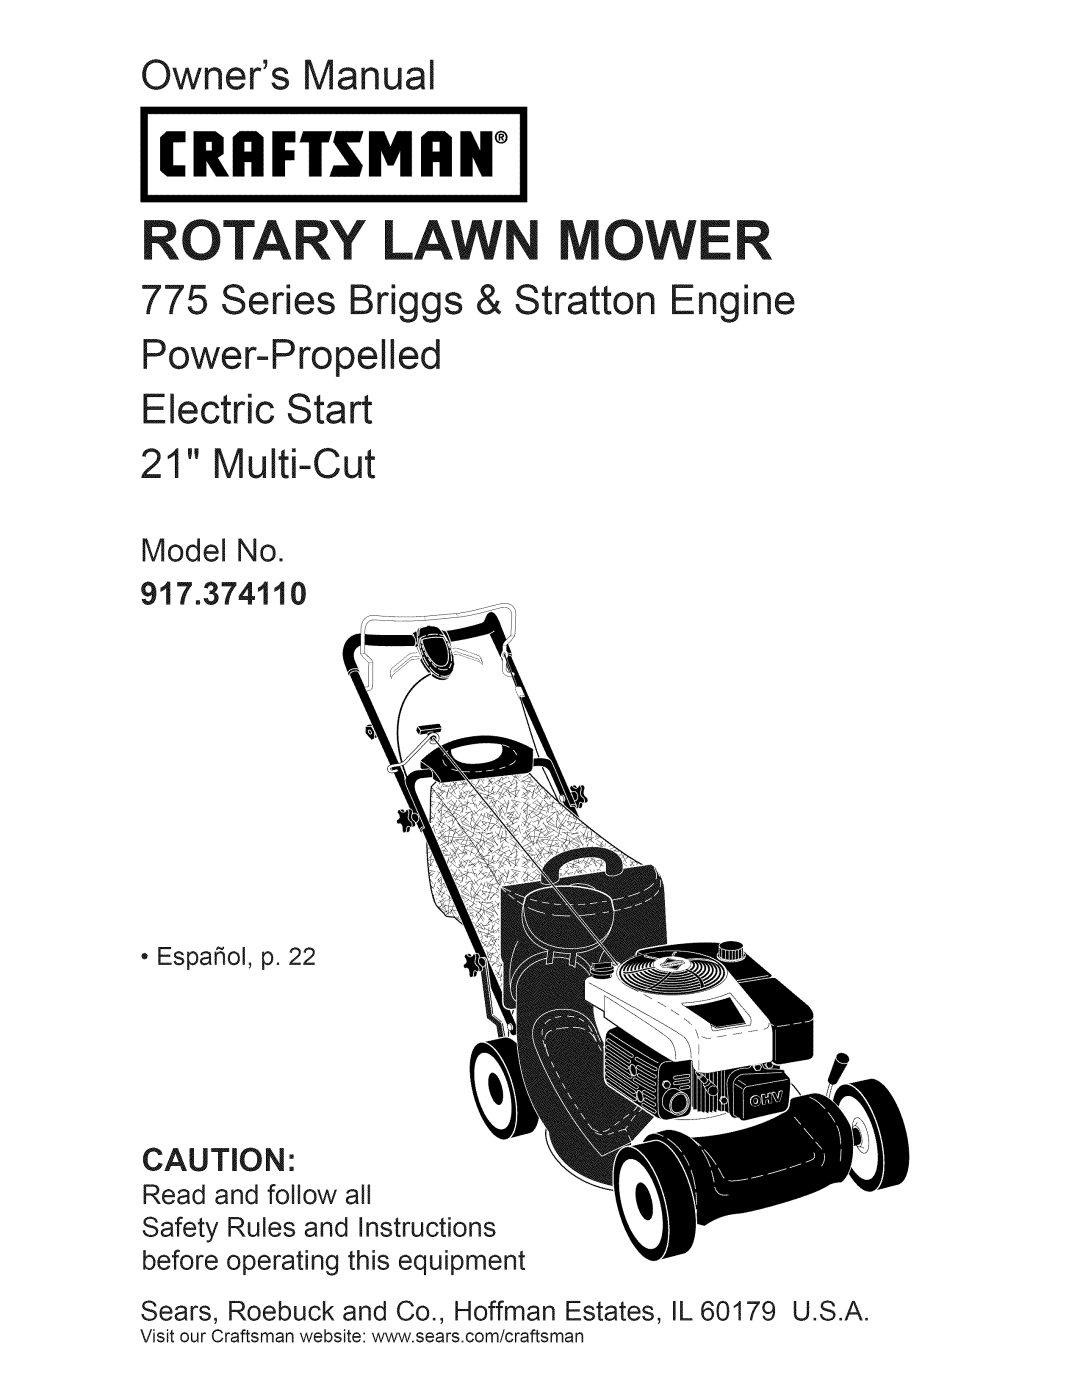 Craftsman 917.374110 owner manual Craftsman, Rotary Lawn Mower, Owners Manual, Series Briggs & Stratton Engine 